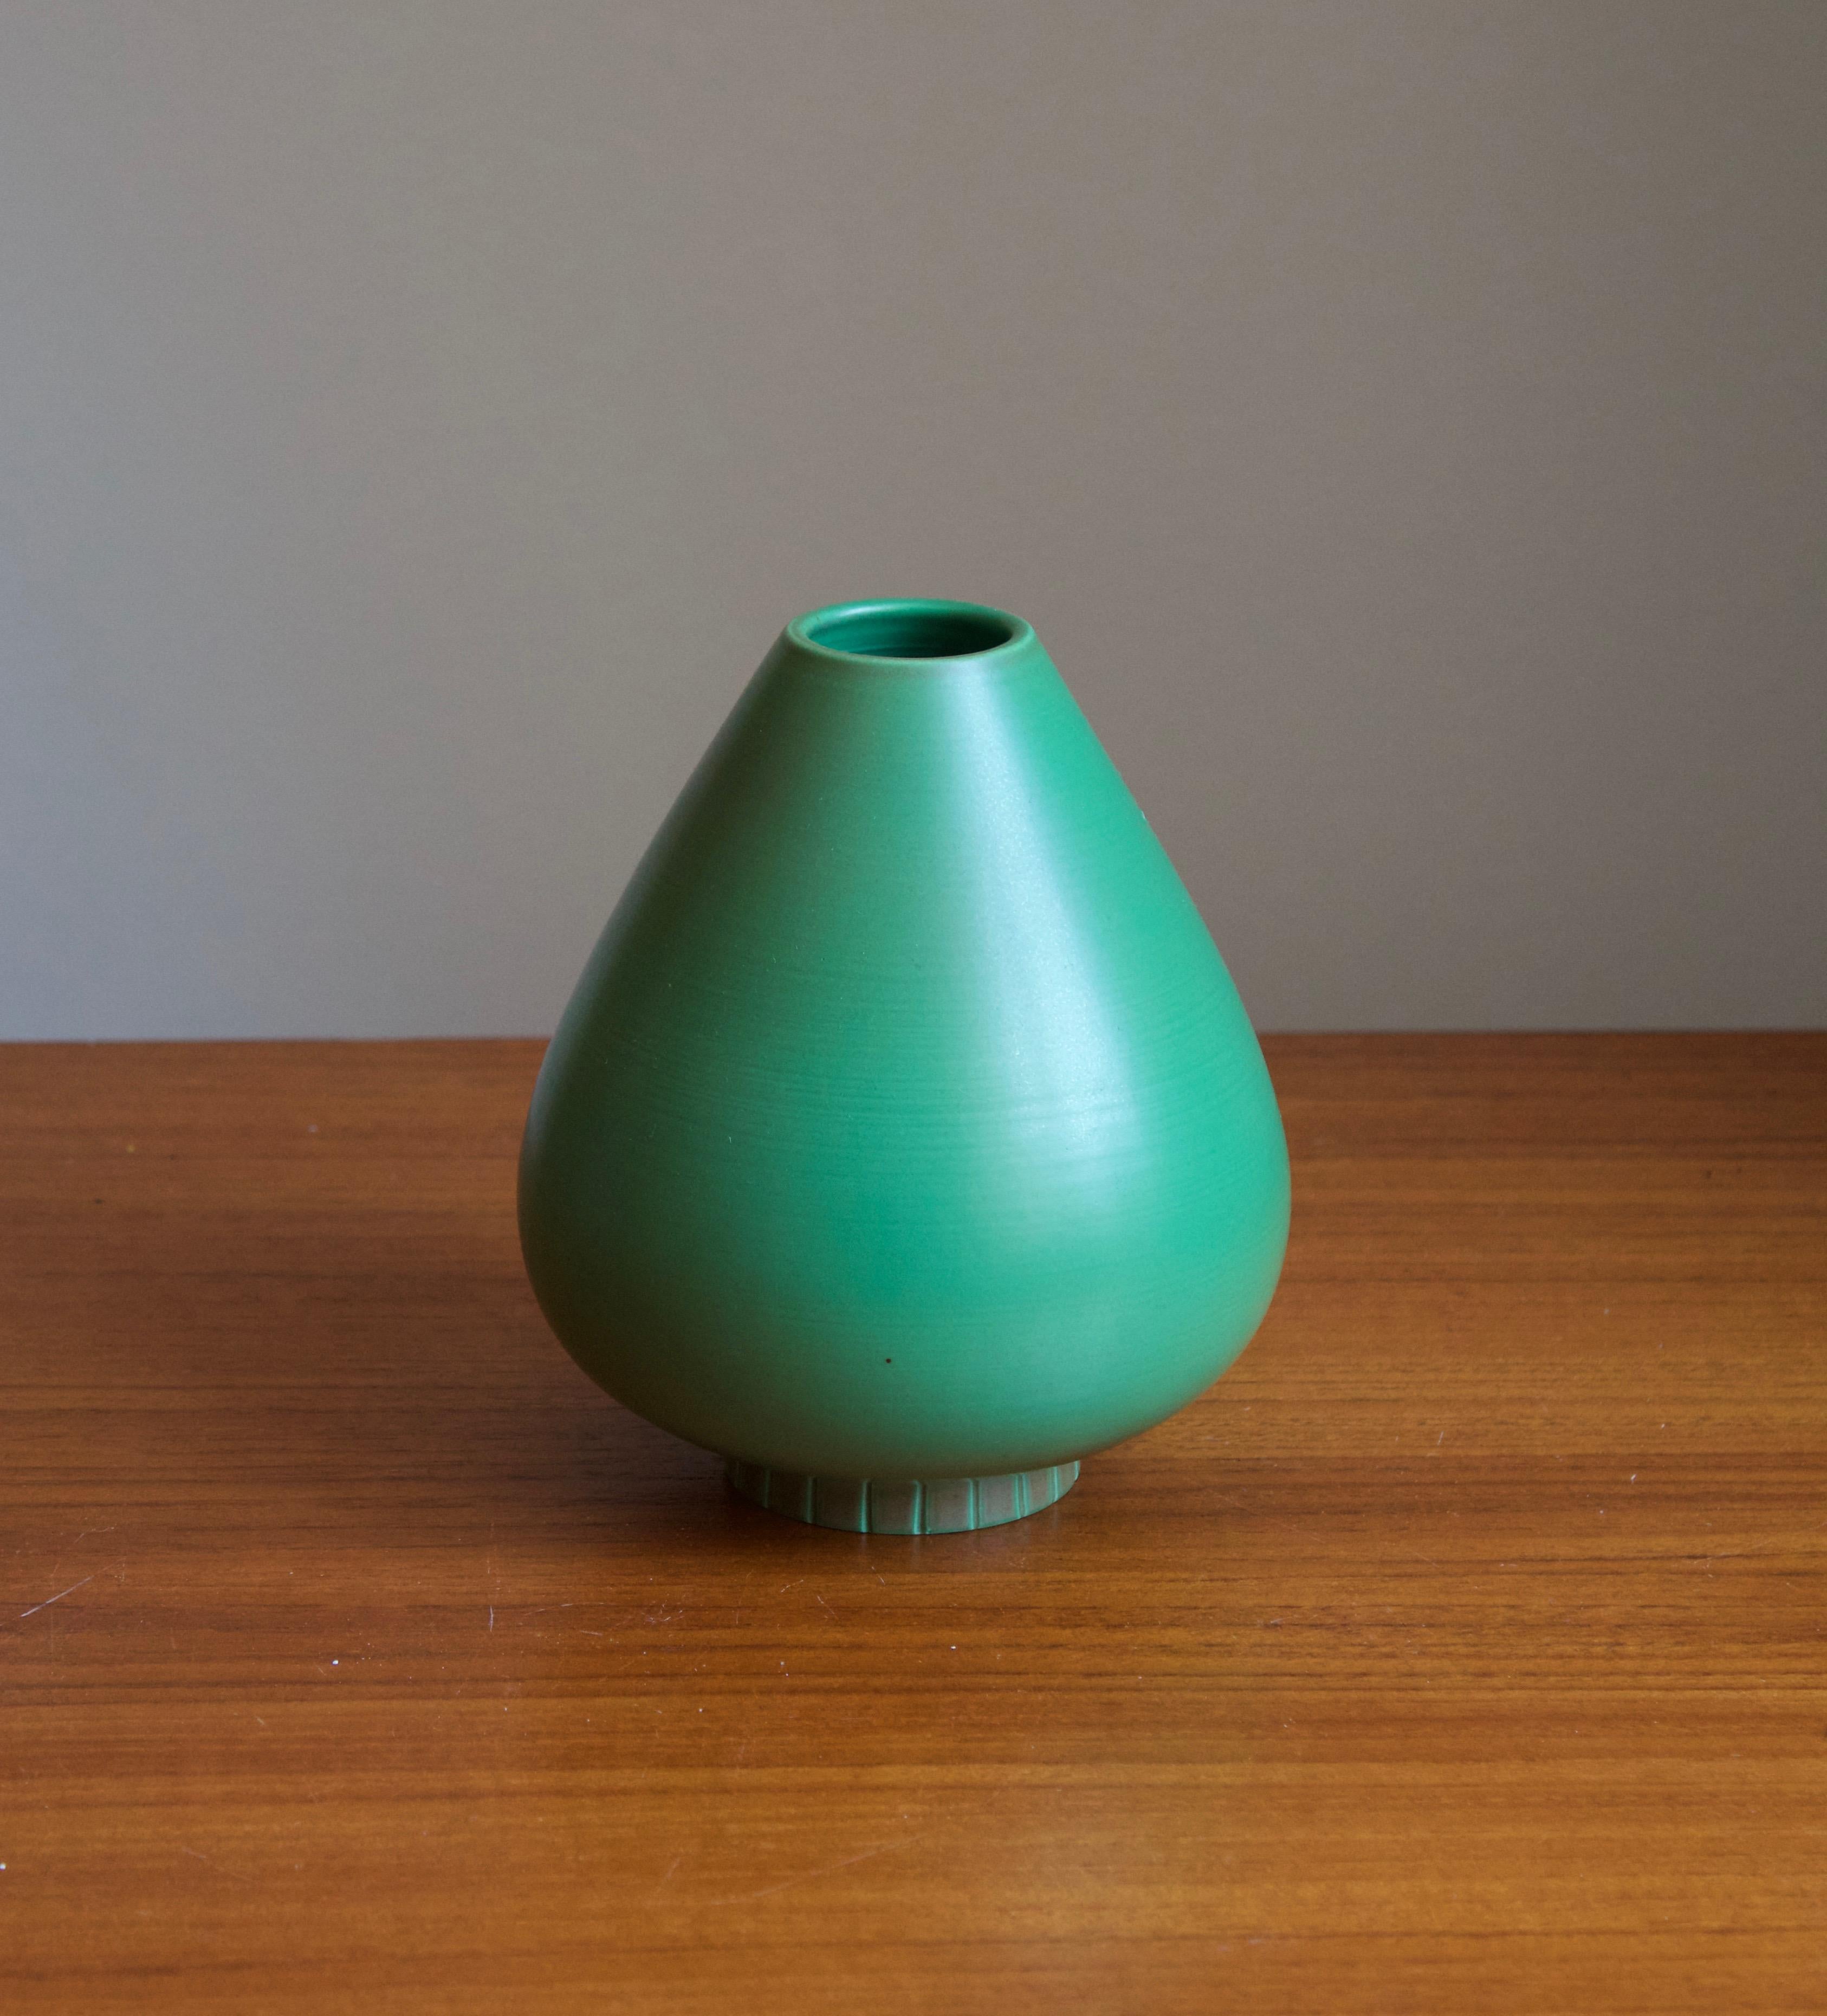 A vase or vessel produced by Rörstrands, Sweden, 1950s. Designed by Gunnar Nylund, (Swedish, 1914-1997). Signed.

Nylund served as artistic director at Rörstrands, where he worked 1931-1955. Prior to his work at Rörstrand he was a well-established